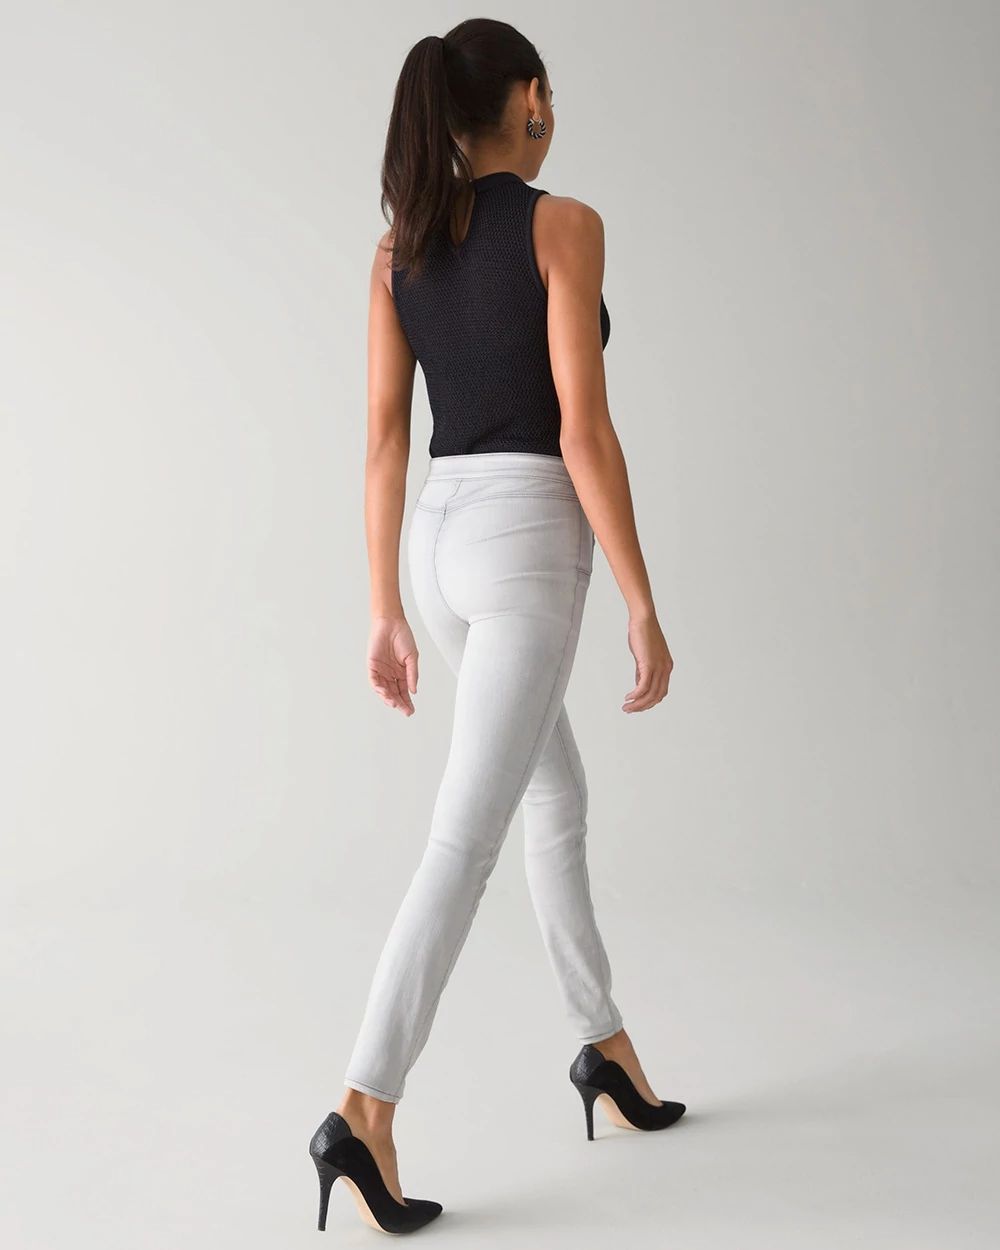 High-Rise Sailor Button Skinny Jeans click to view larger image.